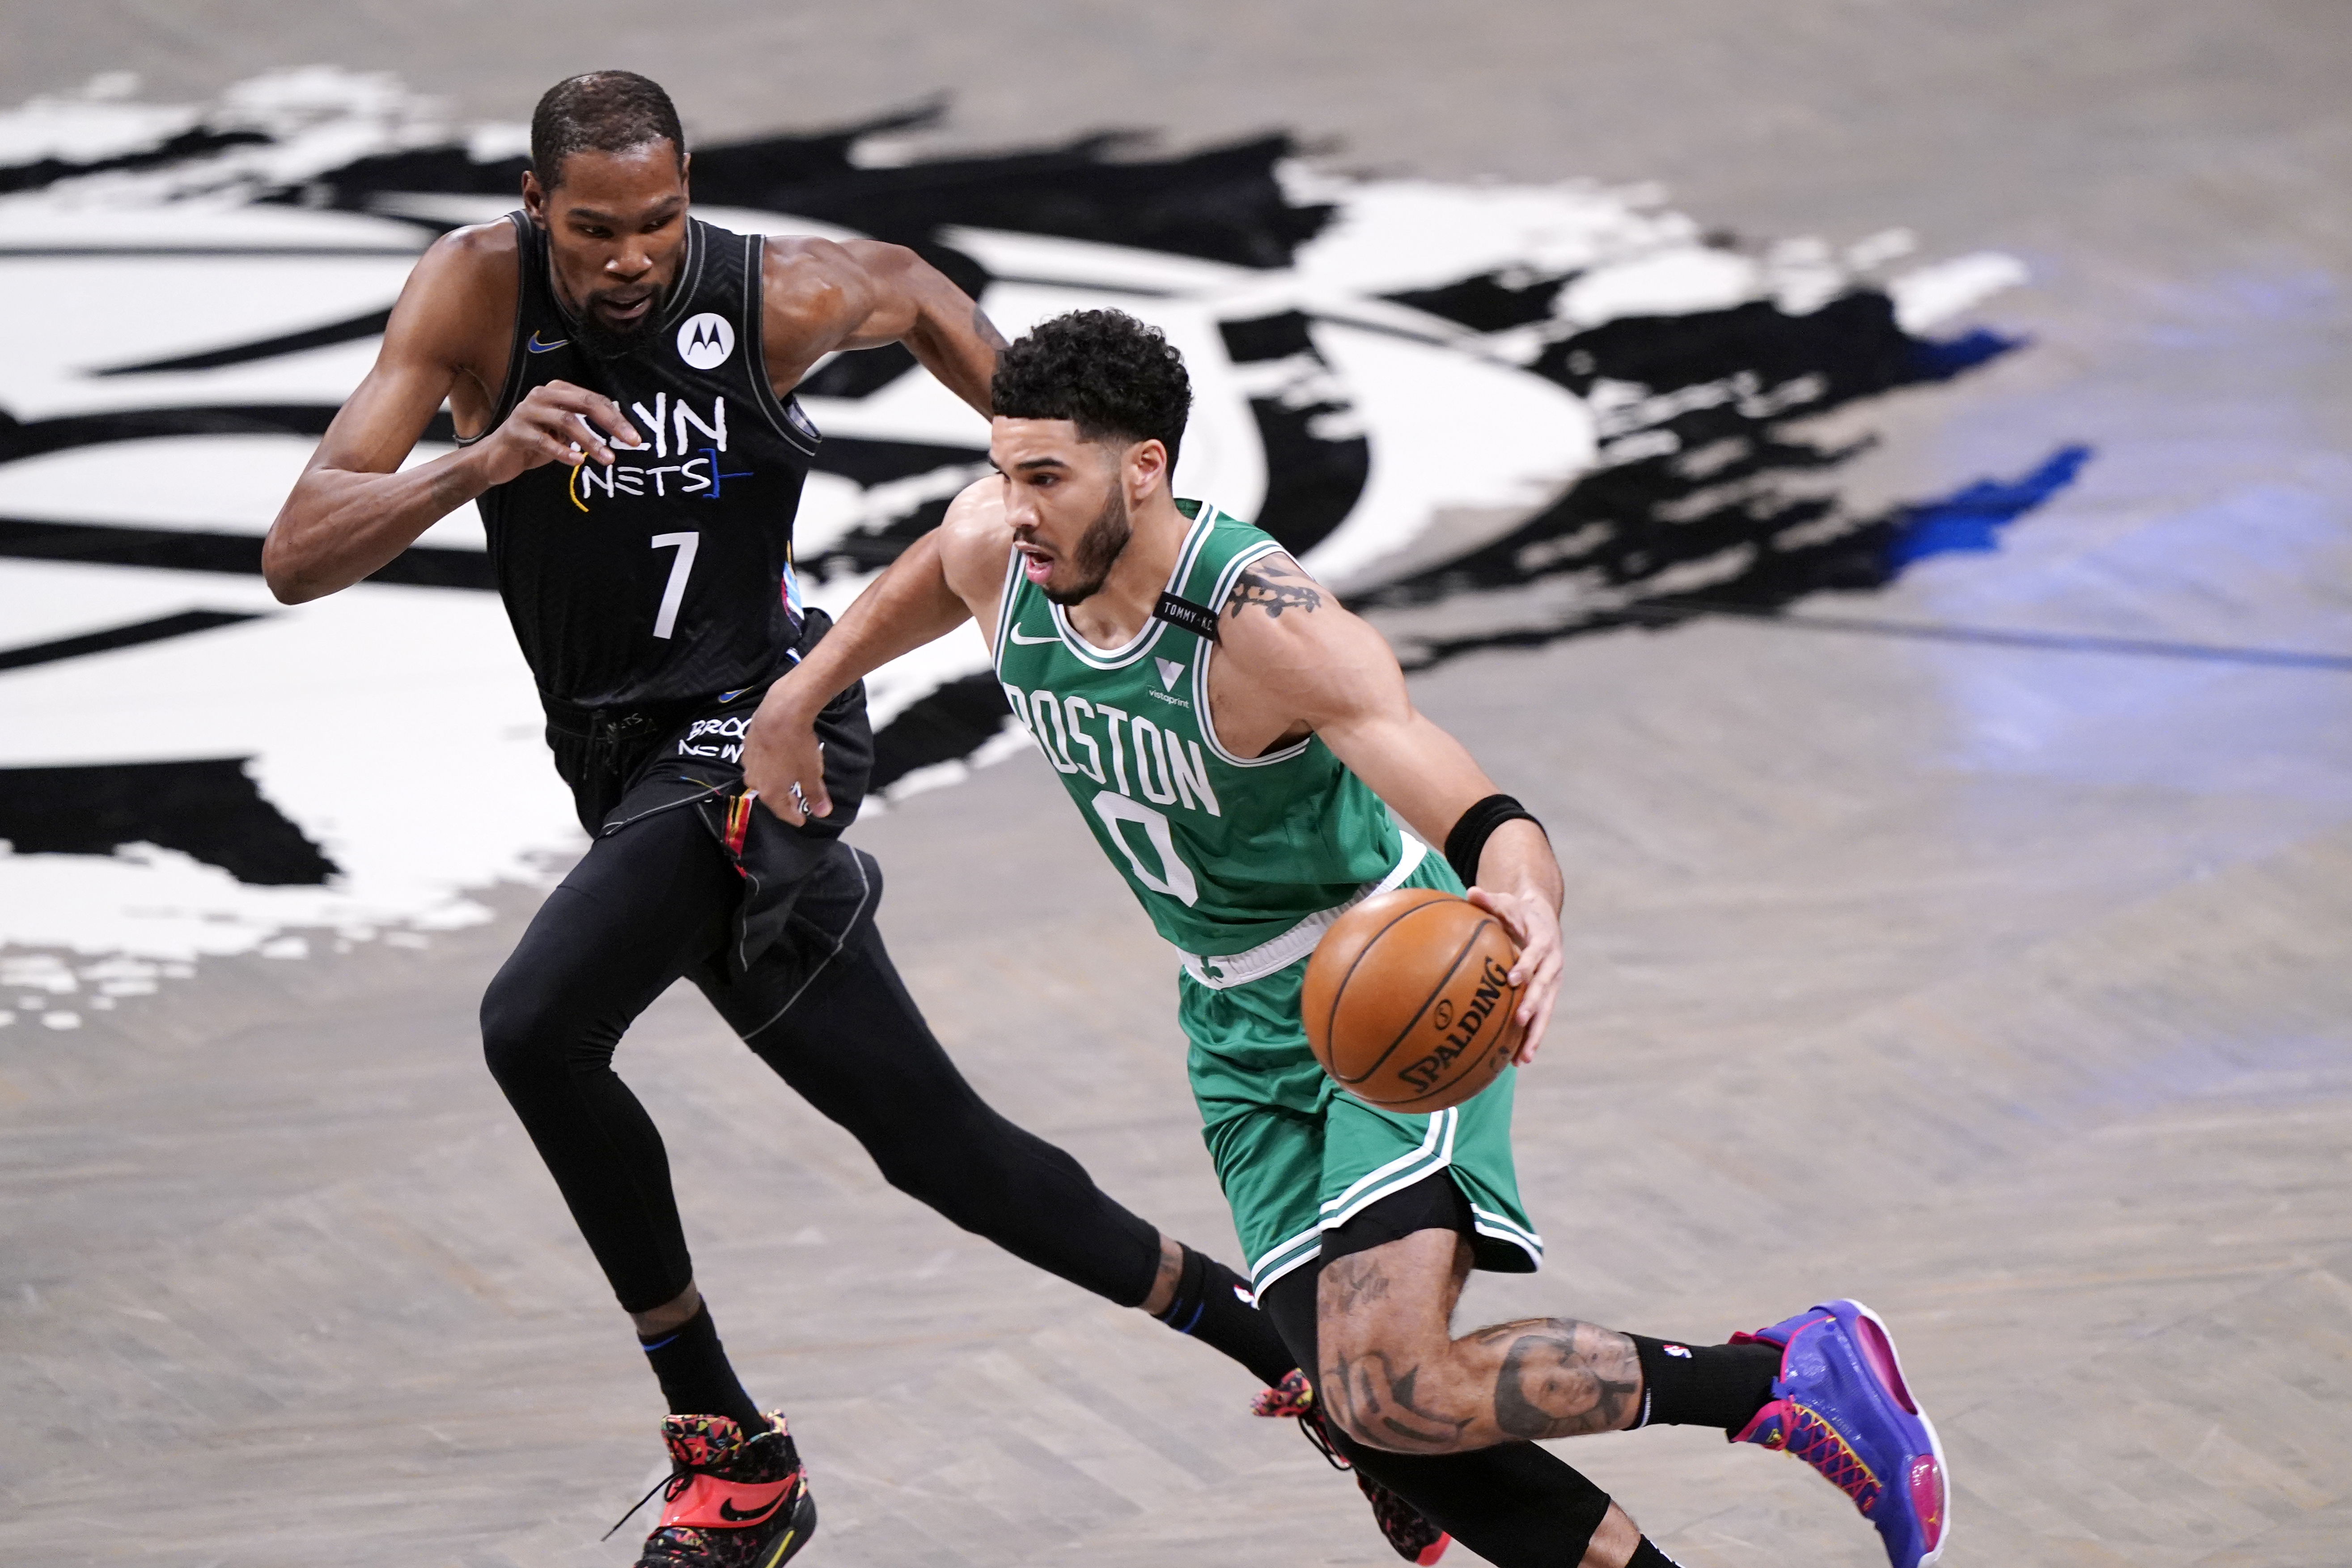 Jayson Tatum at the 2022 NBA All-Star Game in Cleveland, Ohio (Photos)